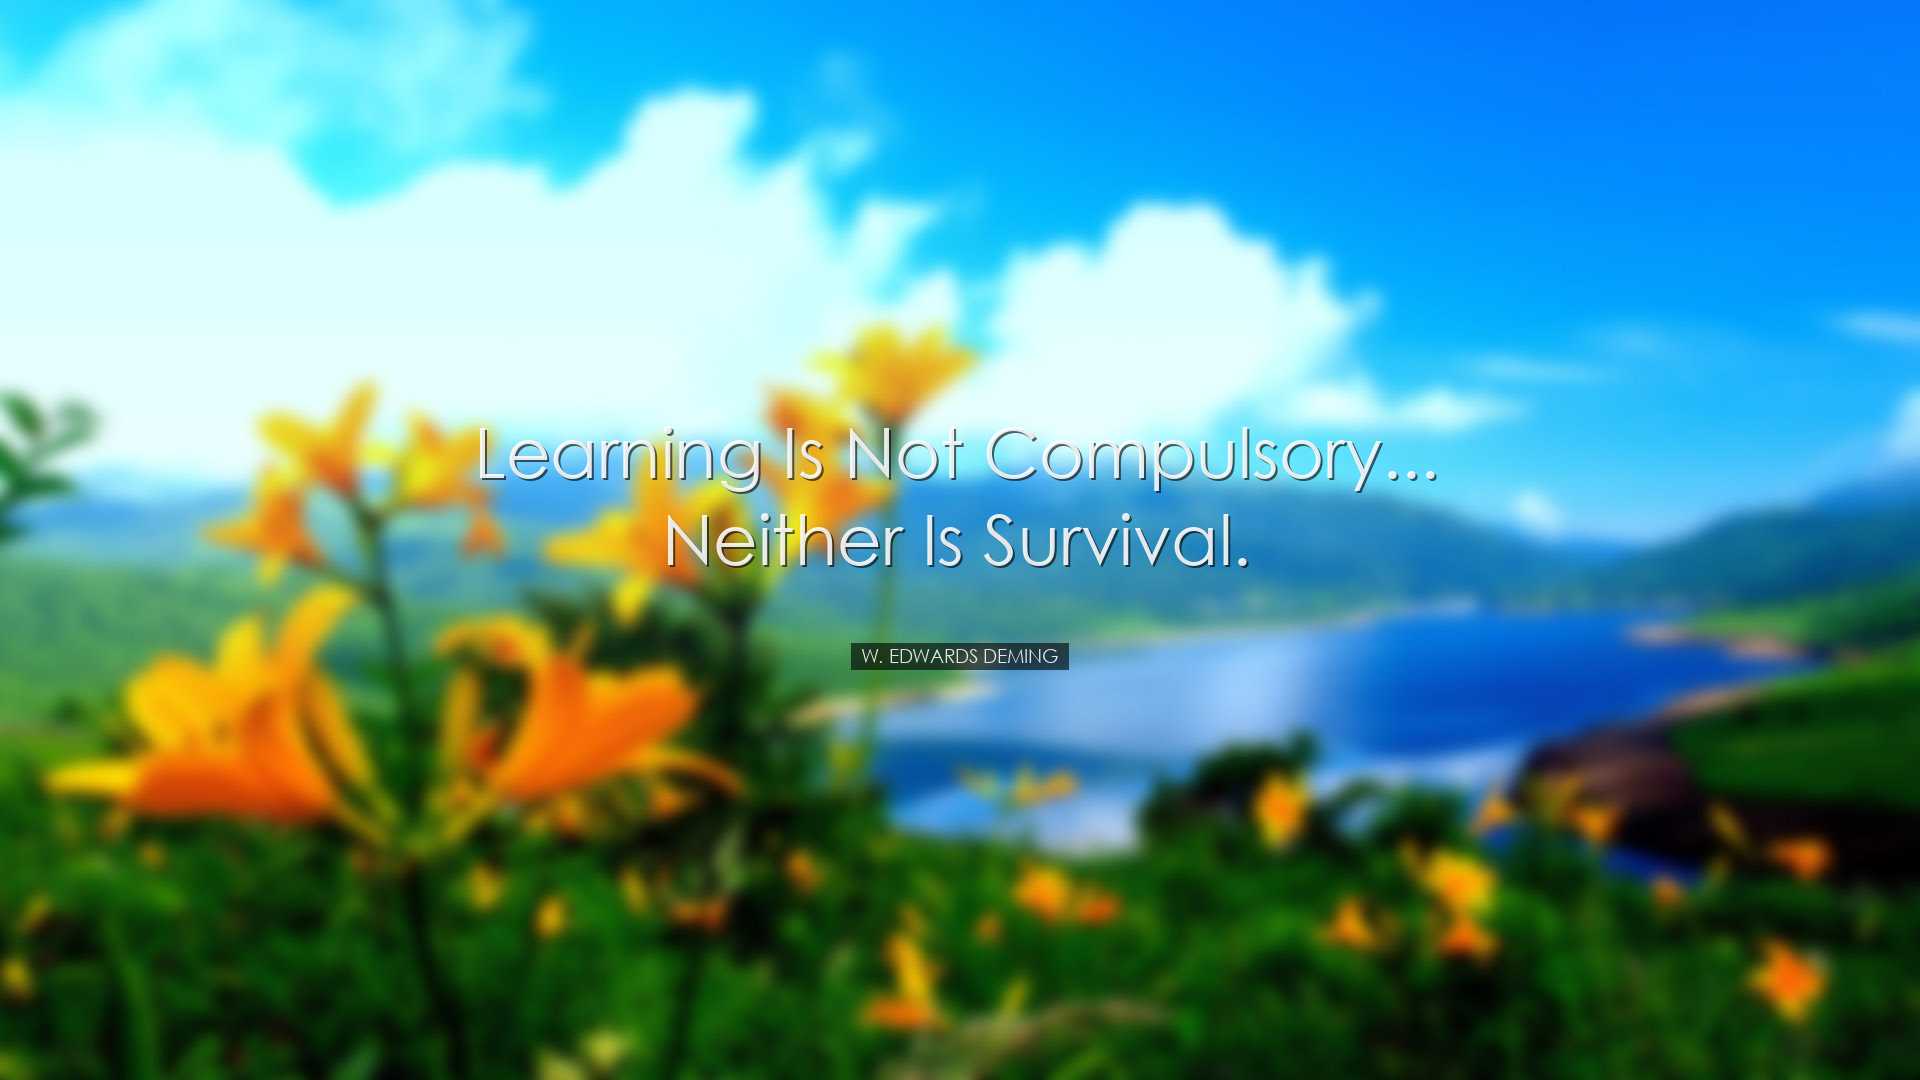 Learning is not compulsory... neither is survival. - W. Edwards De